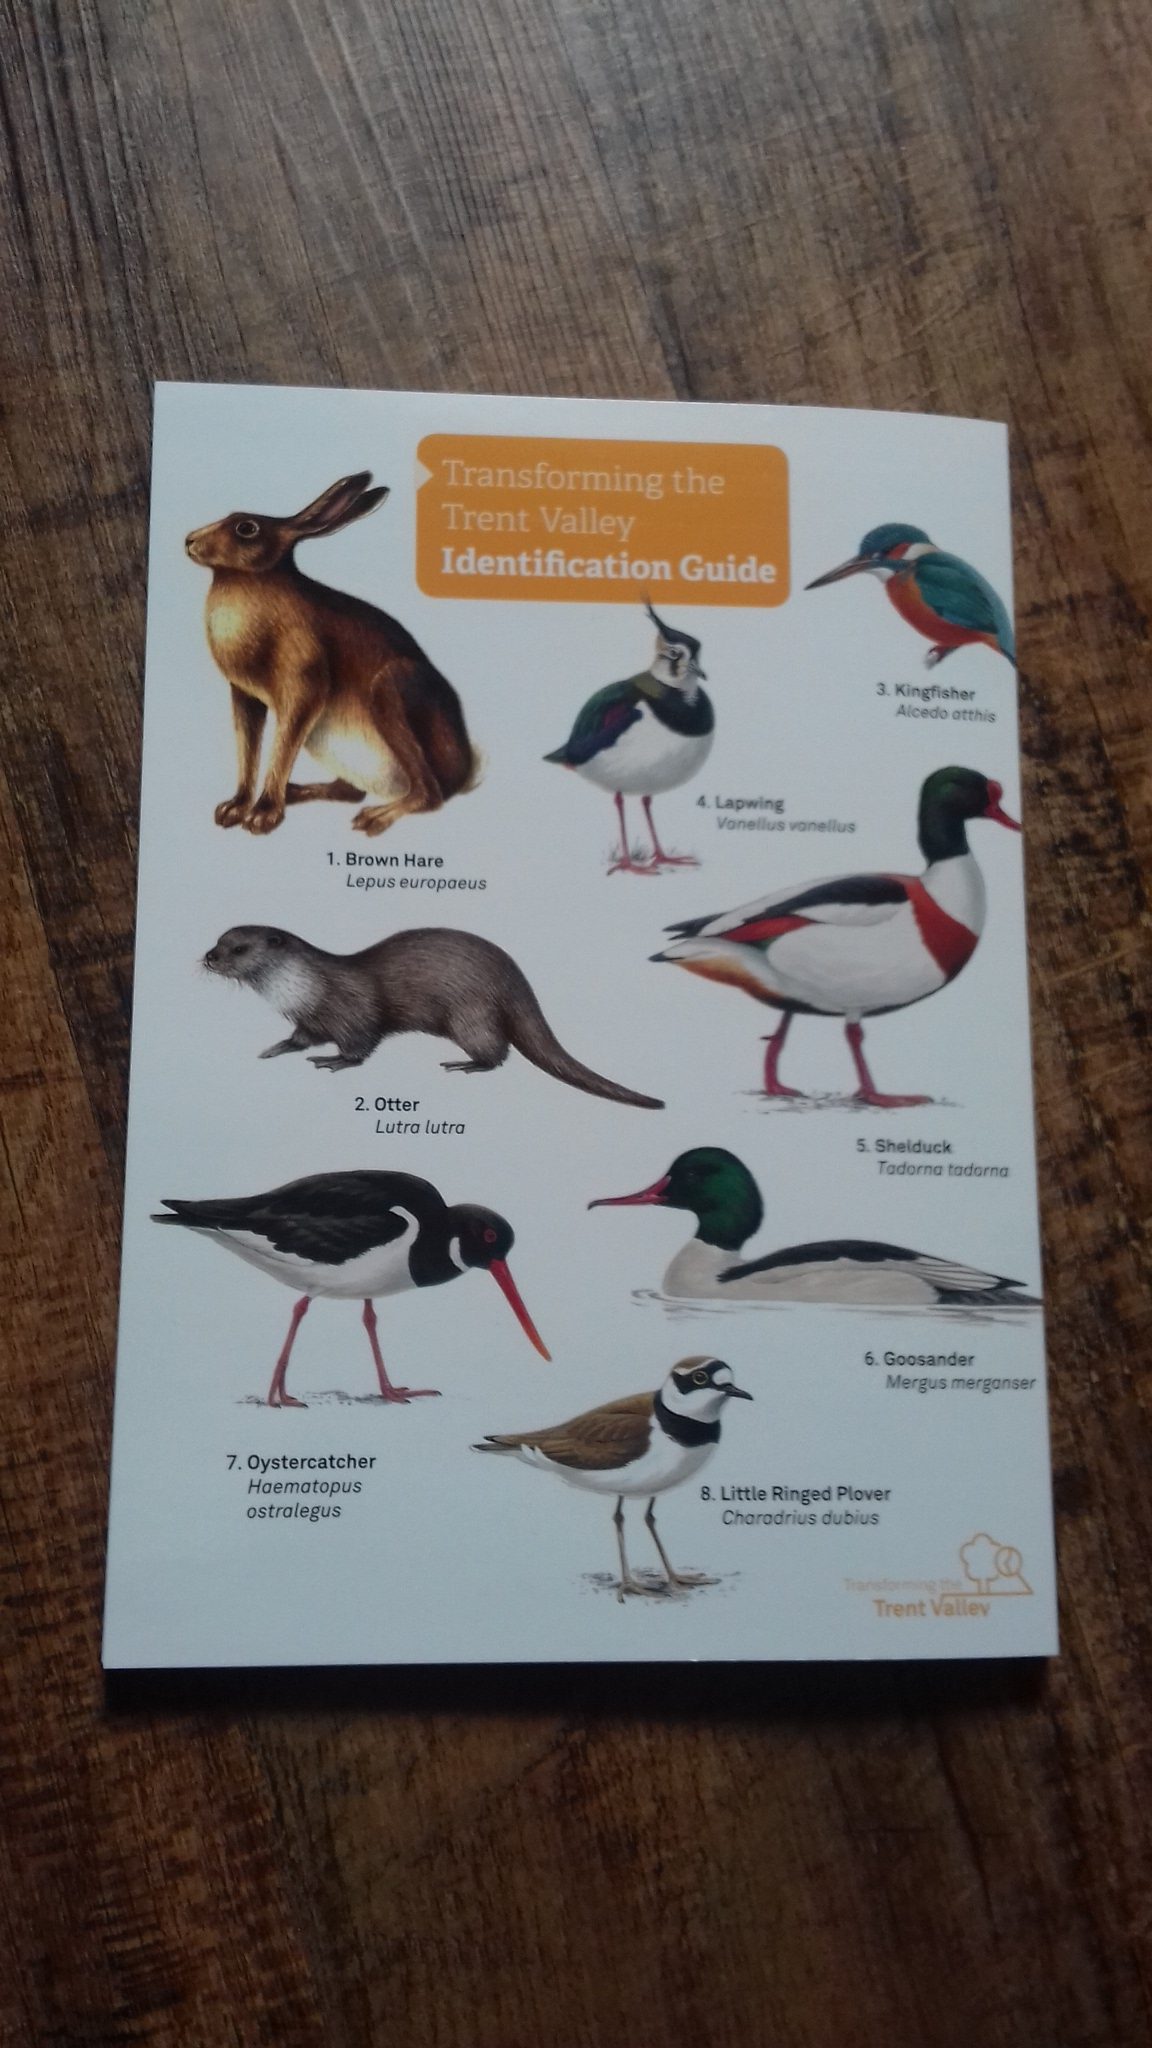 The front page of a fold out wildlife guide, showing different birds